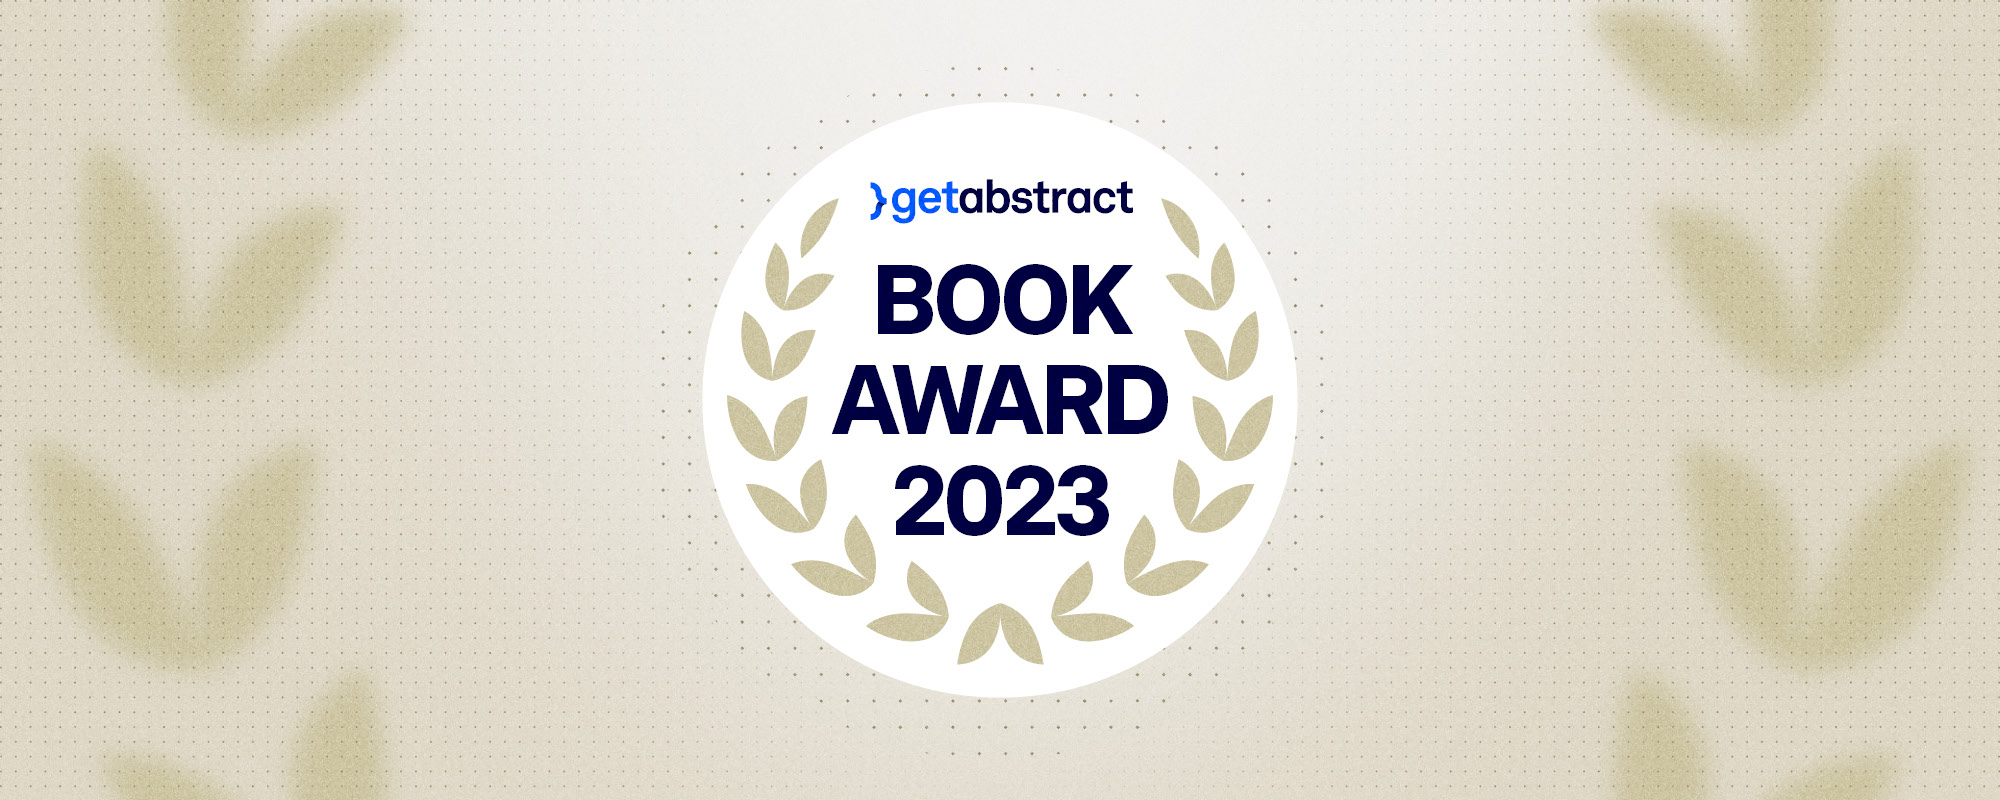 getAbstract Announces 2023 International Book Award “Business Impact” & “Learning Impact” Longlists